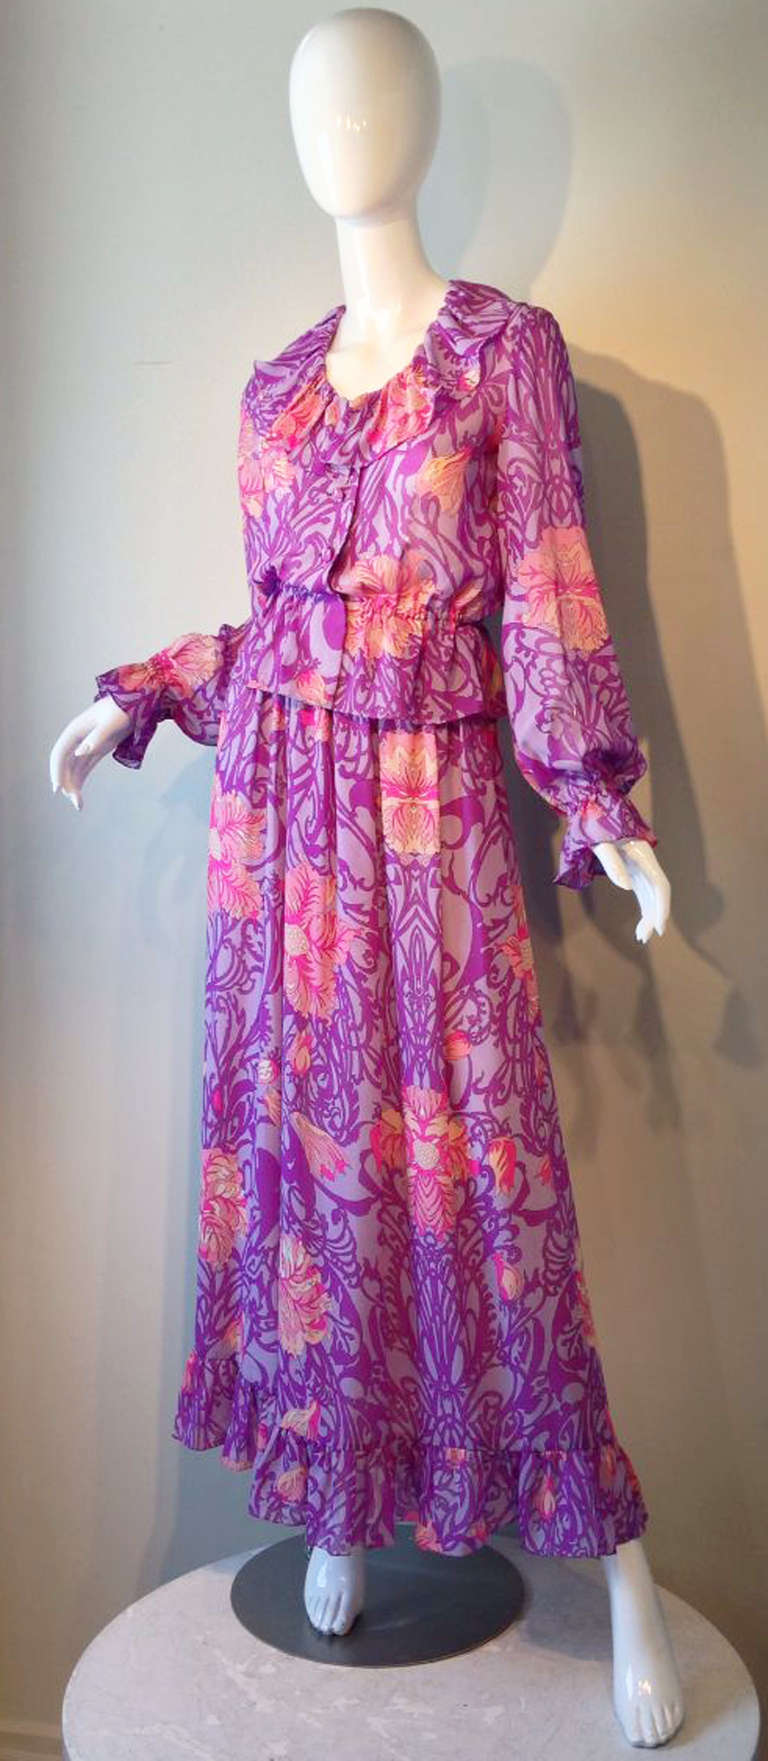 A exquisite Emilio Pucci 2pc. gown. Signed chiffon print fabric item include a nipped waist top with full cuffed sleeves, button front closures and ruffle trimmed neckline. Matching skirt features ruffle hemline. Items fully lined except sleeves.